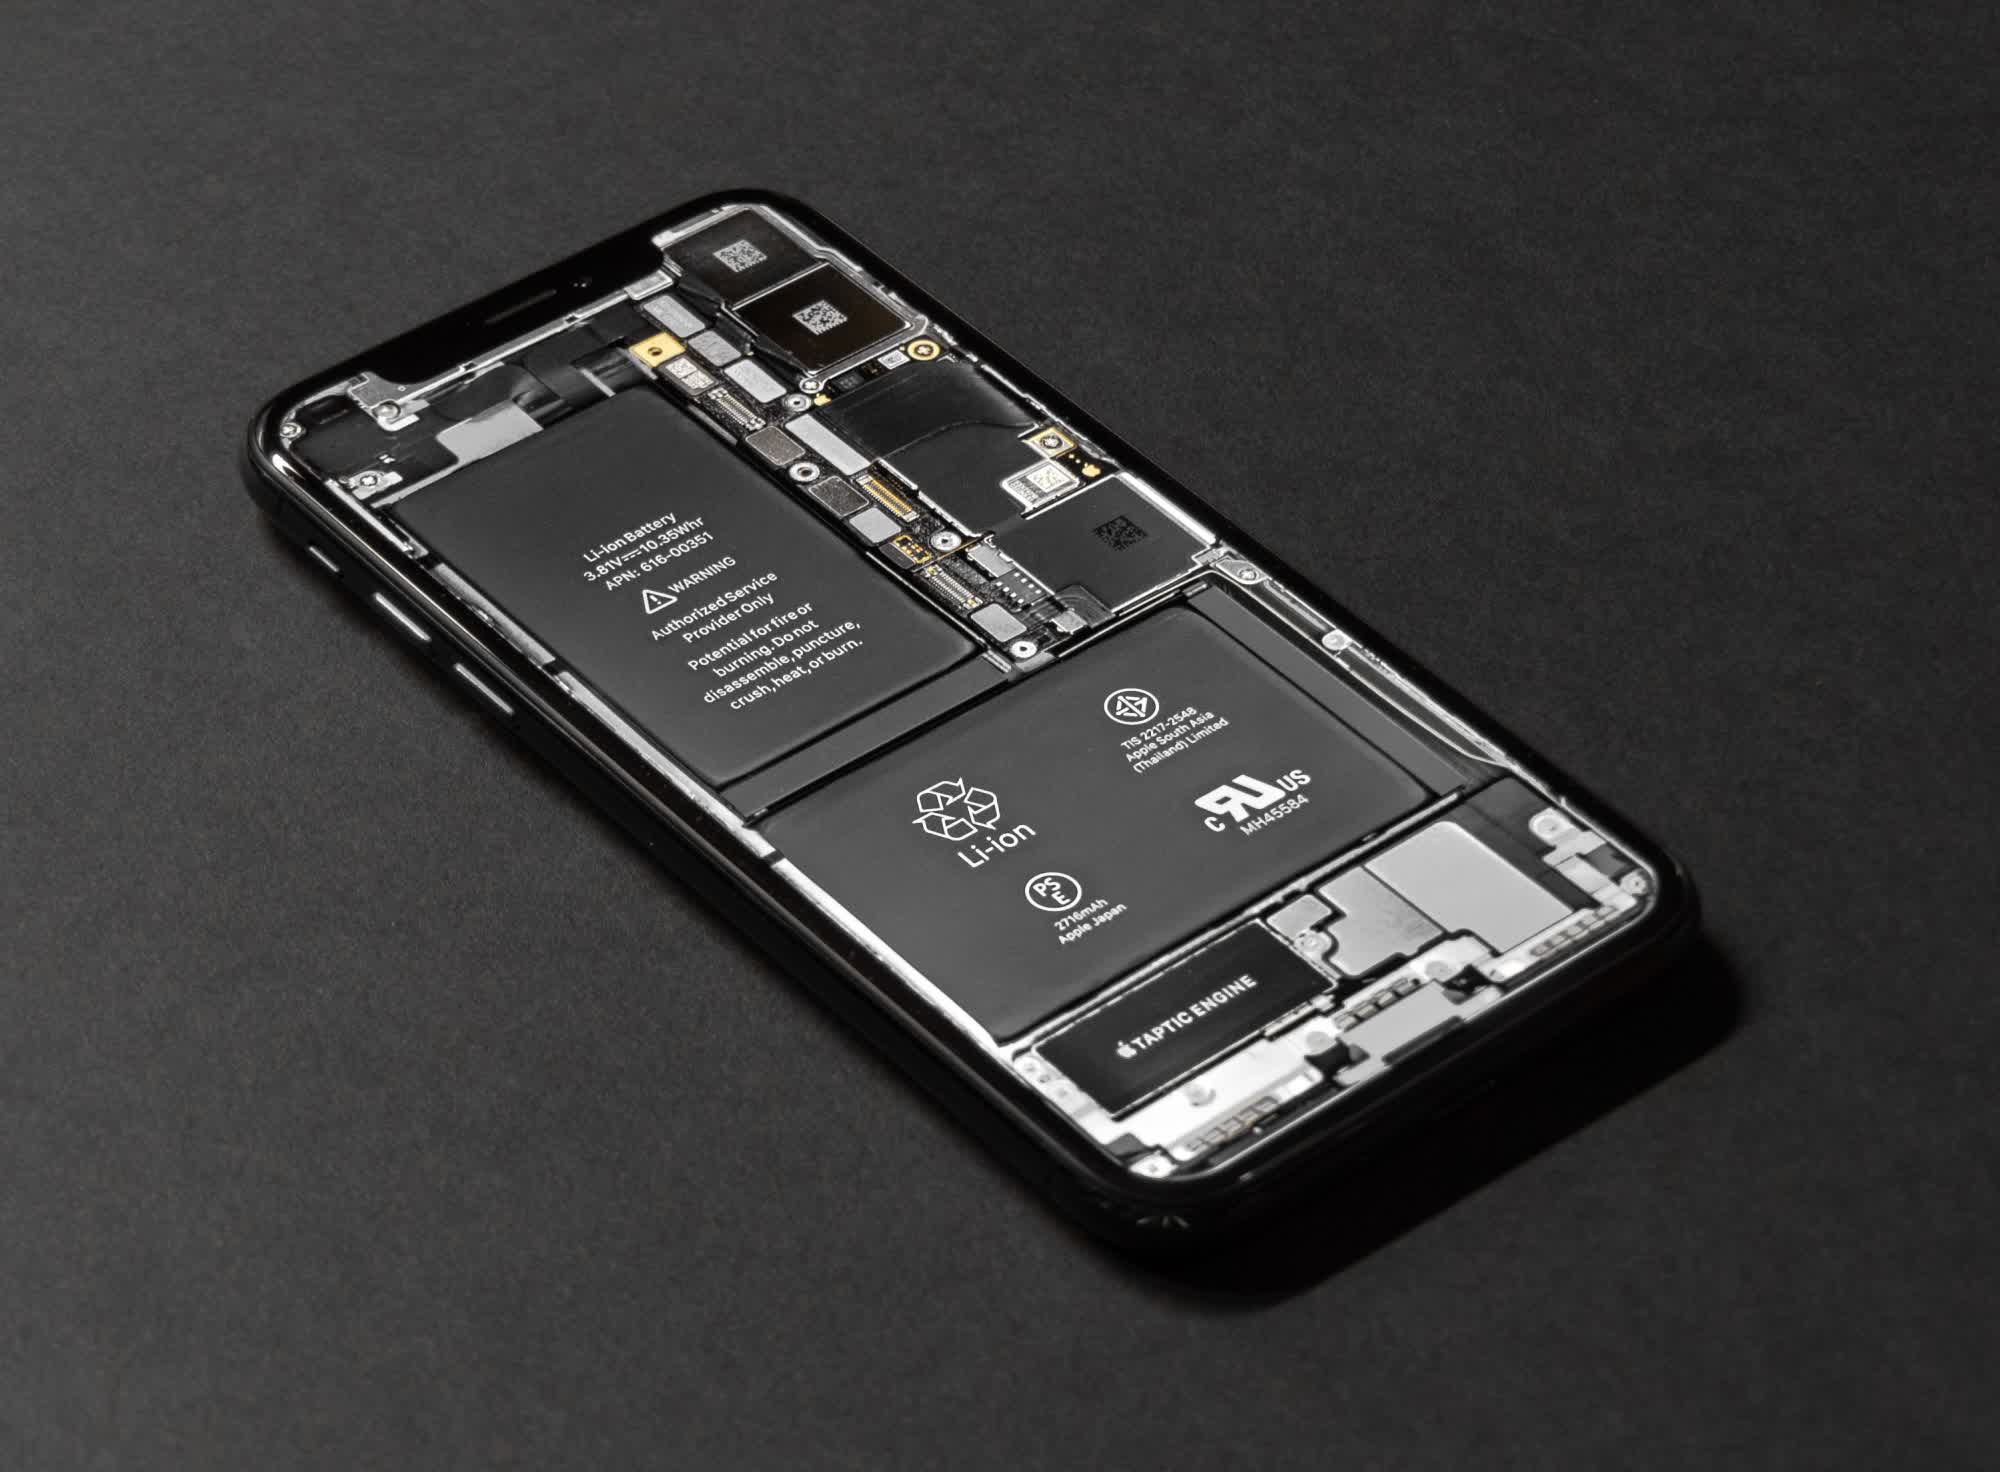 Repairability vs reliability: Apple argues that removable batteries add a potential failure point to phones